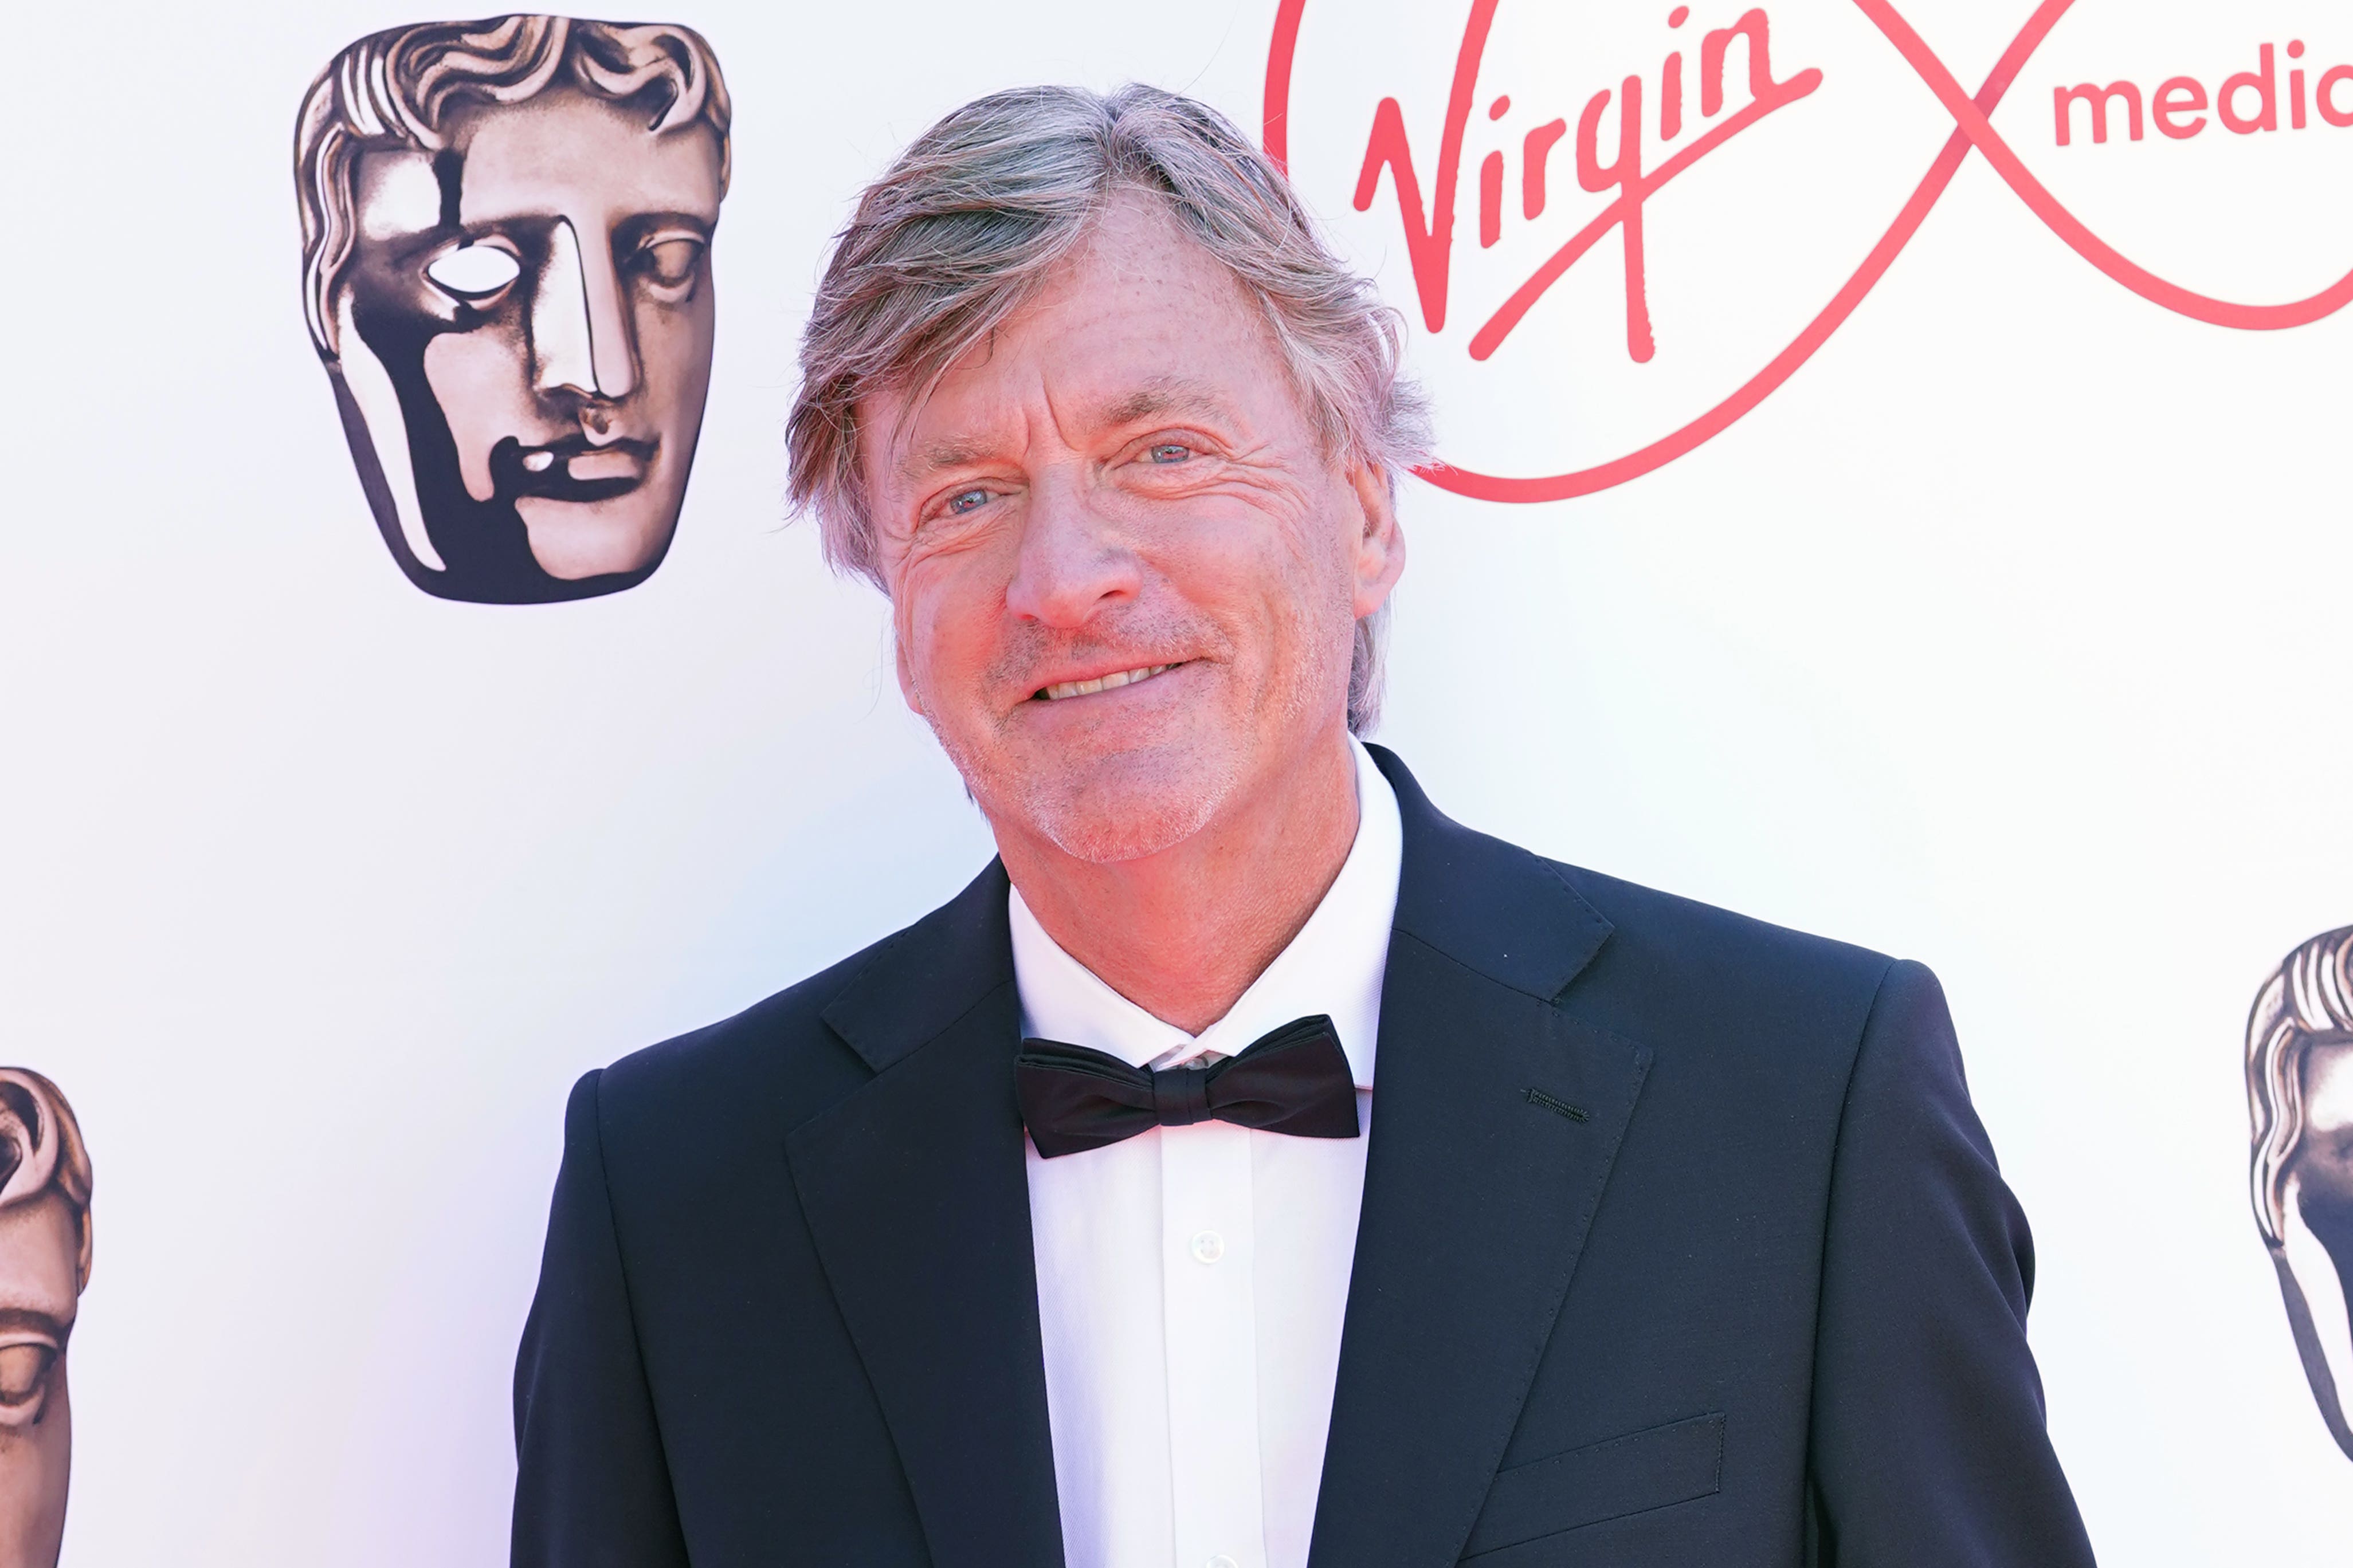 Richard Madeley was compared to Alan Patridge after promoting his book on Radio 2